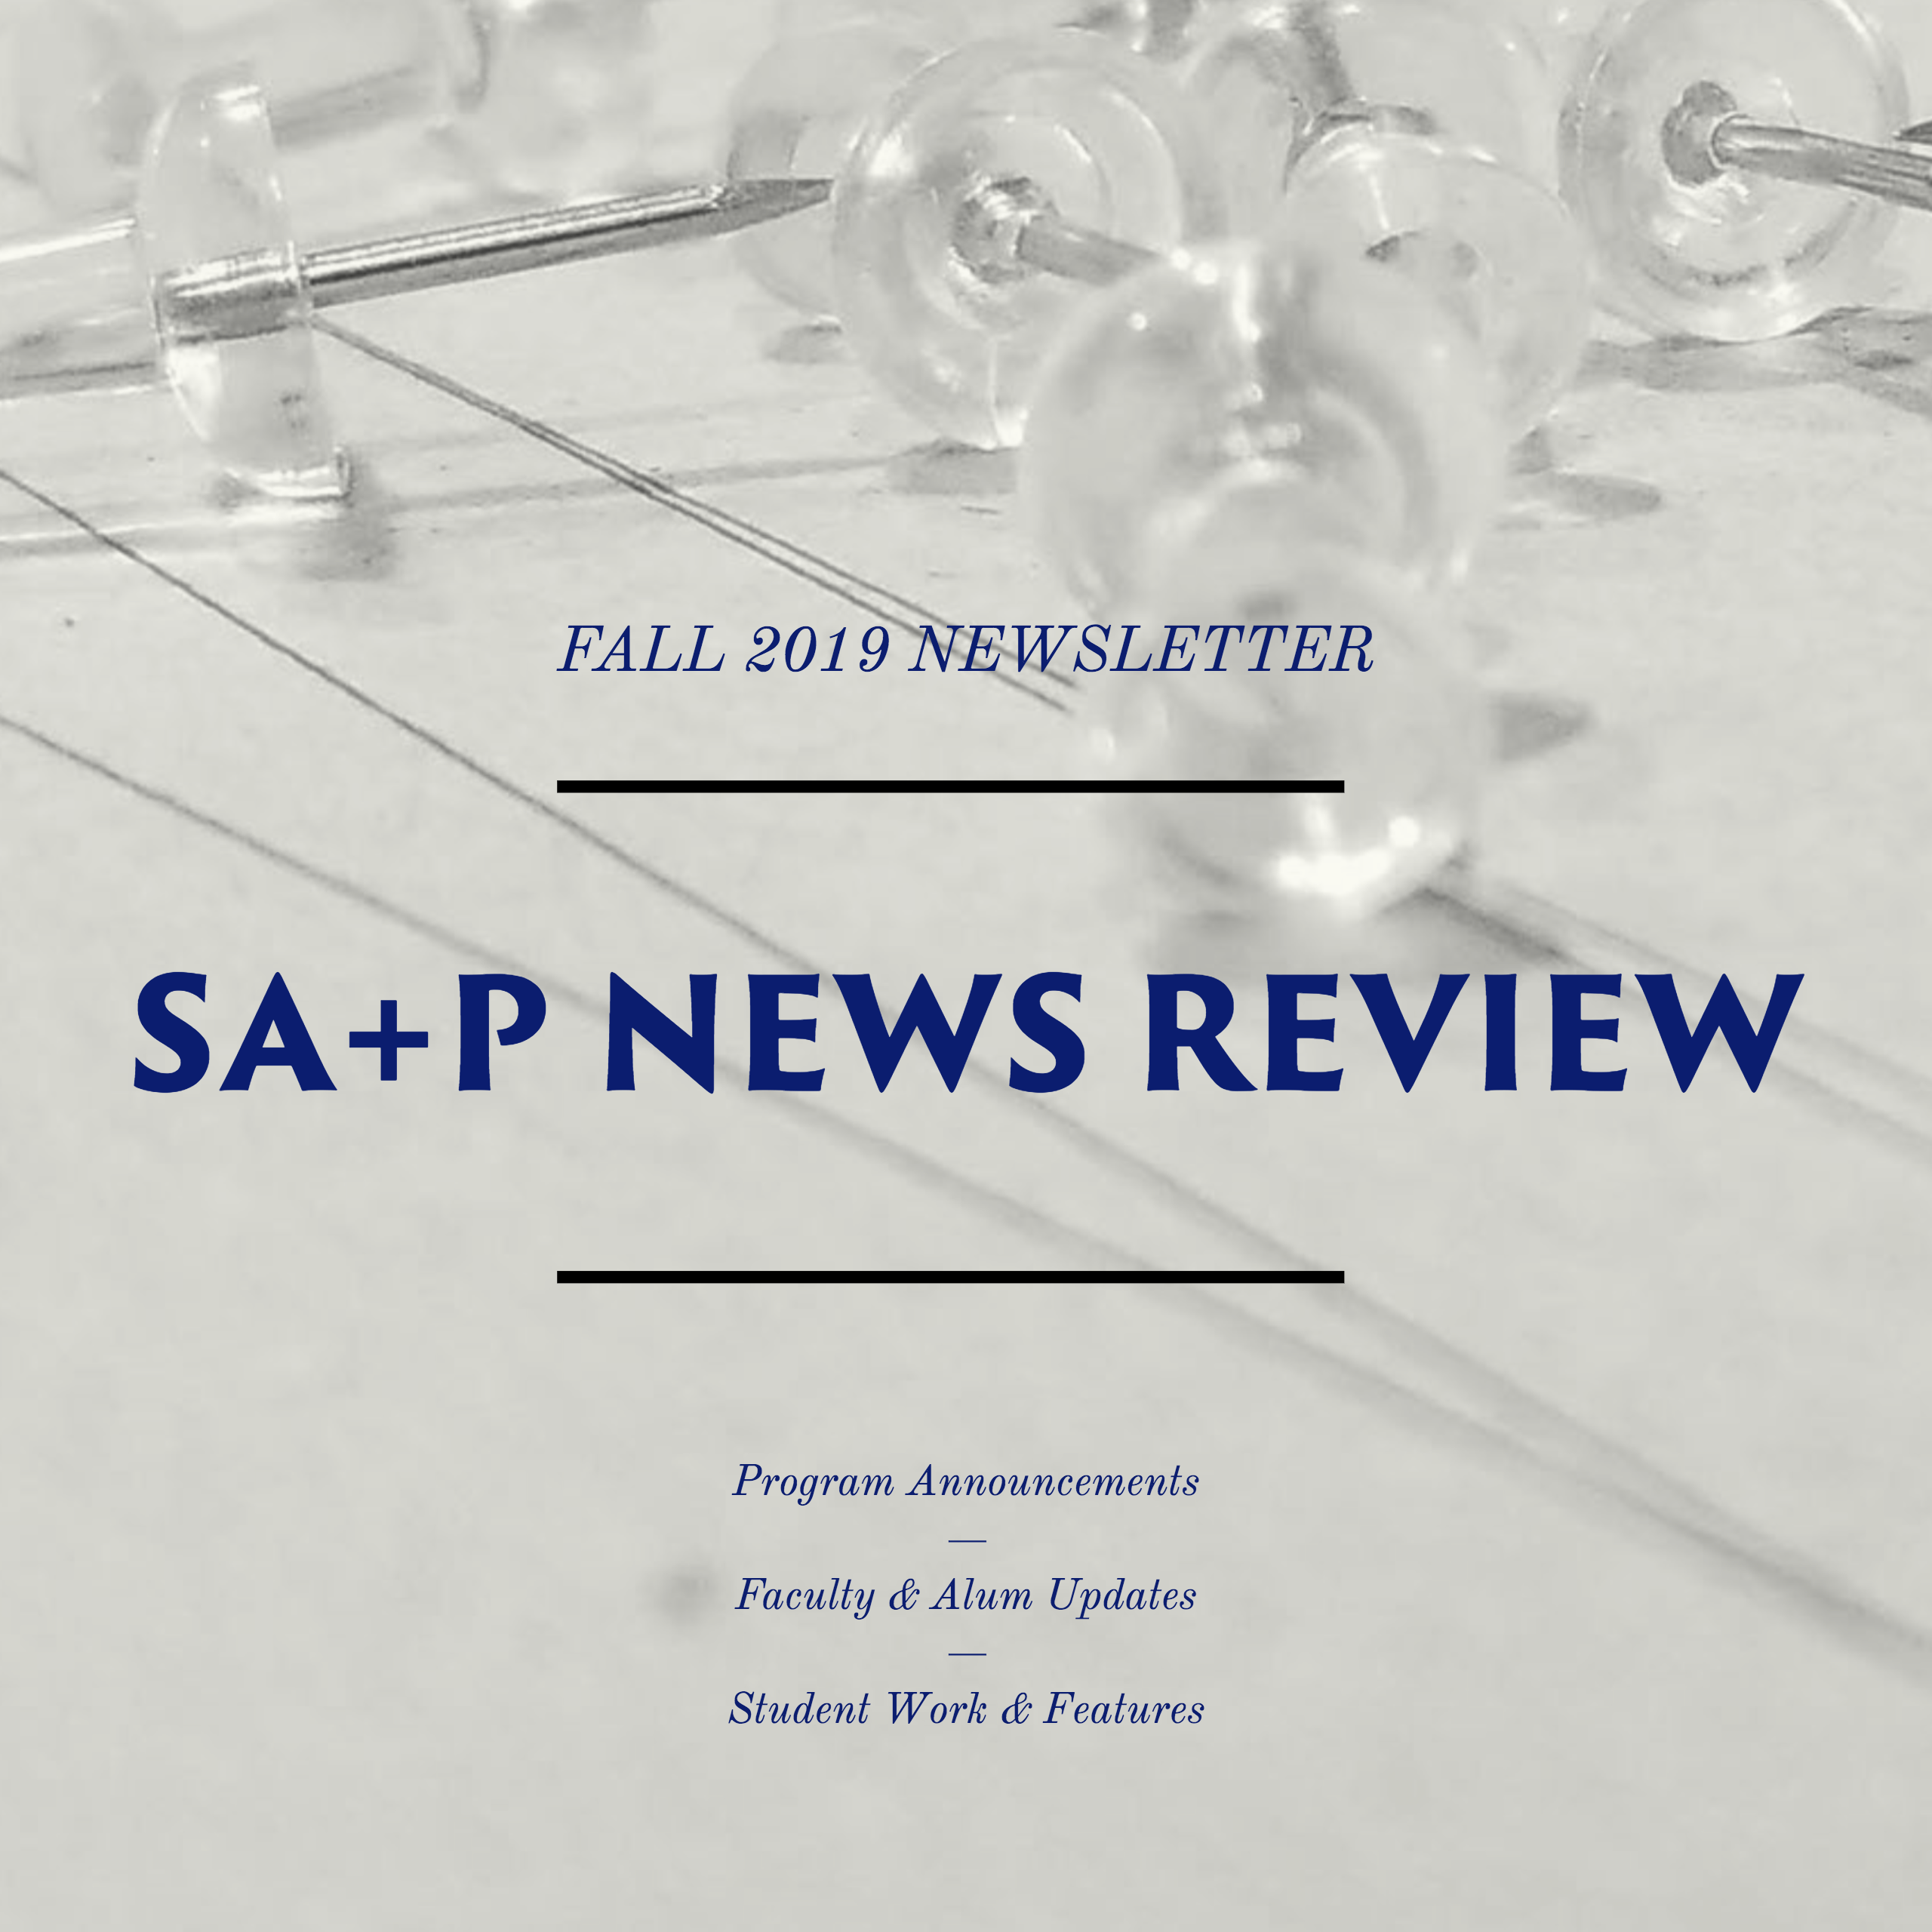 Fall 2019 Newsletter cover image